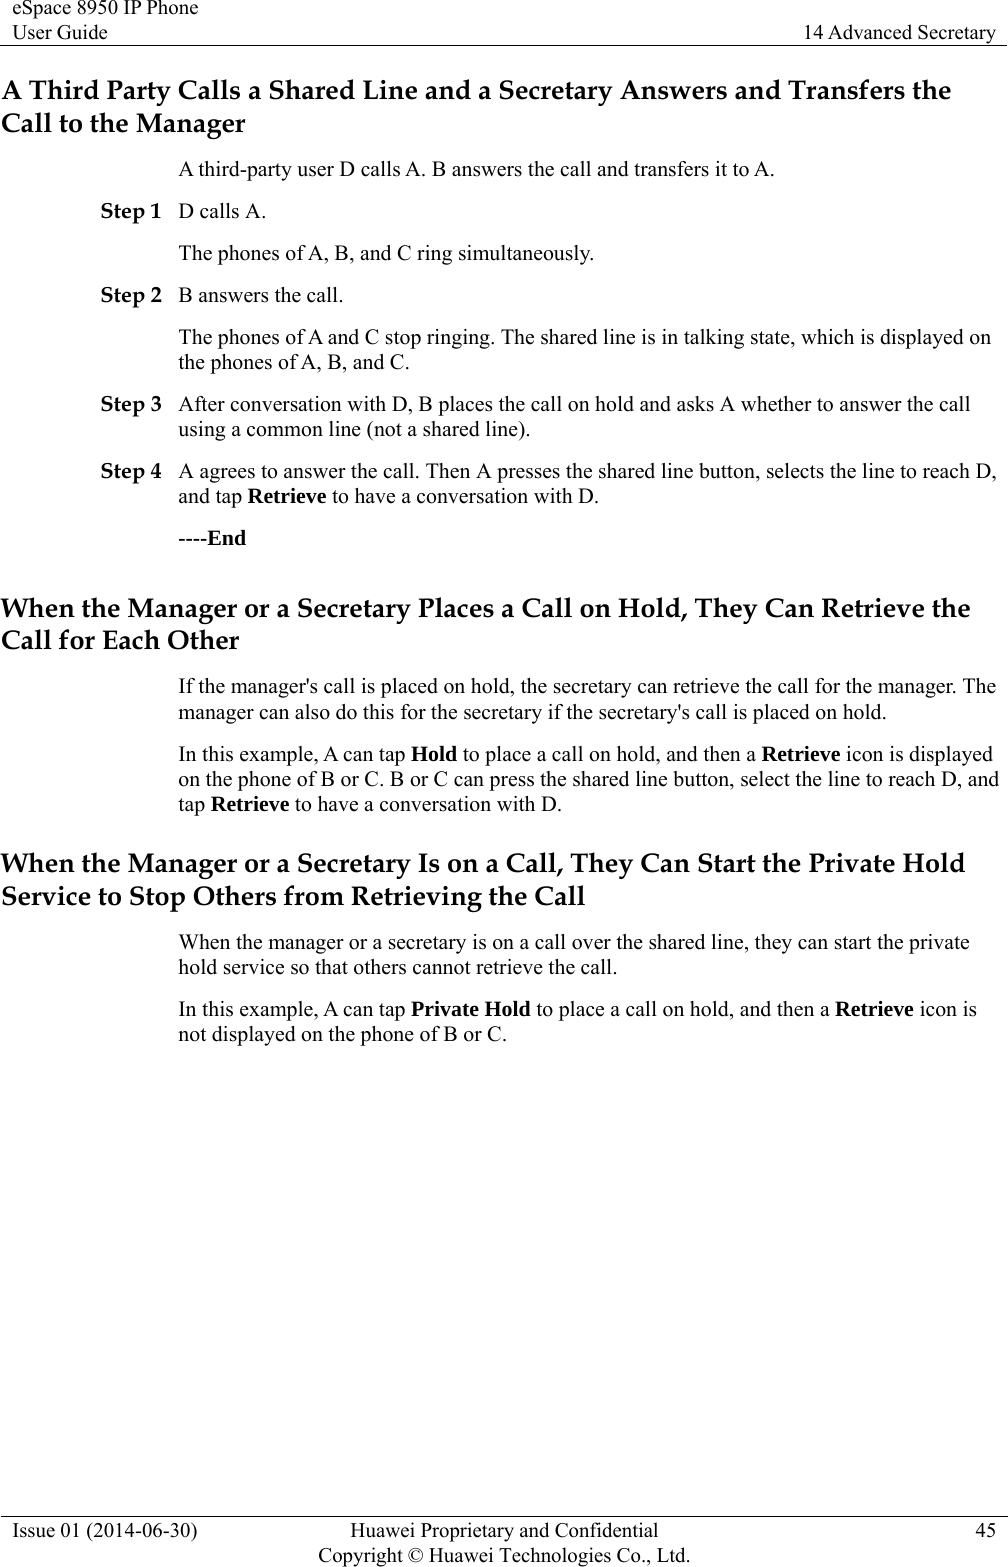 eSpace 8950 IP Phone User Guide  14 Advanced Secretary Issue 01 (2014-06-30)  Huawei Proprietary and Confidential         Copyright © Huawei Technologies Co., Ltd.45 A Third Party Calls a Shared Line and a Secretary Answers and Transfers the Call to the Manager A third-party user D calls A. B answers the call and transfers it to A. Step 1 D calls A. The phones of A, B, and C ring simultaneously.   Step 2 B answers the call.   The phones of A and C stop ringing. The shared line is in talking state, which is displayed on the phones of A, B, and C.   Step 3 After conversation with D, B places the call on hold and asks A whether to answer the call using a common line (not a shared line). Step 4 A agrees to answer the call. Then A presses the shared line button, selects the line to reach D, and tap Retrieve to have a conversation with D. ----End When the Manager or a Secretary Places a Call on Hold, They Can Retrieve the Call for Each Other If the manager&apos;s call is placed on hold, the secretary can retrieve the call for the manager. The manager can also do this for the secretary if the secretary&apos;s call is placed on hold. In this example, A can tap Hold to place a call on hold, and then a Retrieve icon is displayed on the phone of B or C. B or C can press the shared line button, select the line to reach D, and tap Retrieve to have a conversation with D. When the Manager or a Secretary Is on a Call, They Can Start the Private Hold Service to Stop Others from Retrieving the Call When the manager or a secretary is on a call over the shared line, they can start the private hold service so that others cannot retrieve the call. In this example, A can tap Private Hold to place a call on hold, and then a Retrieve icon is not displayed on the phone of B or C. 